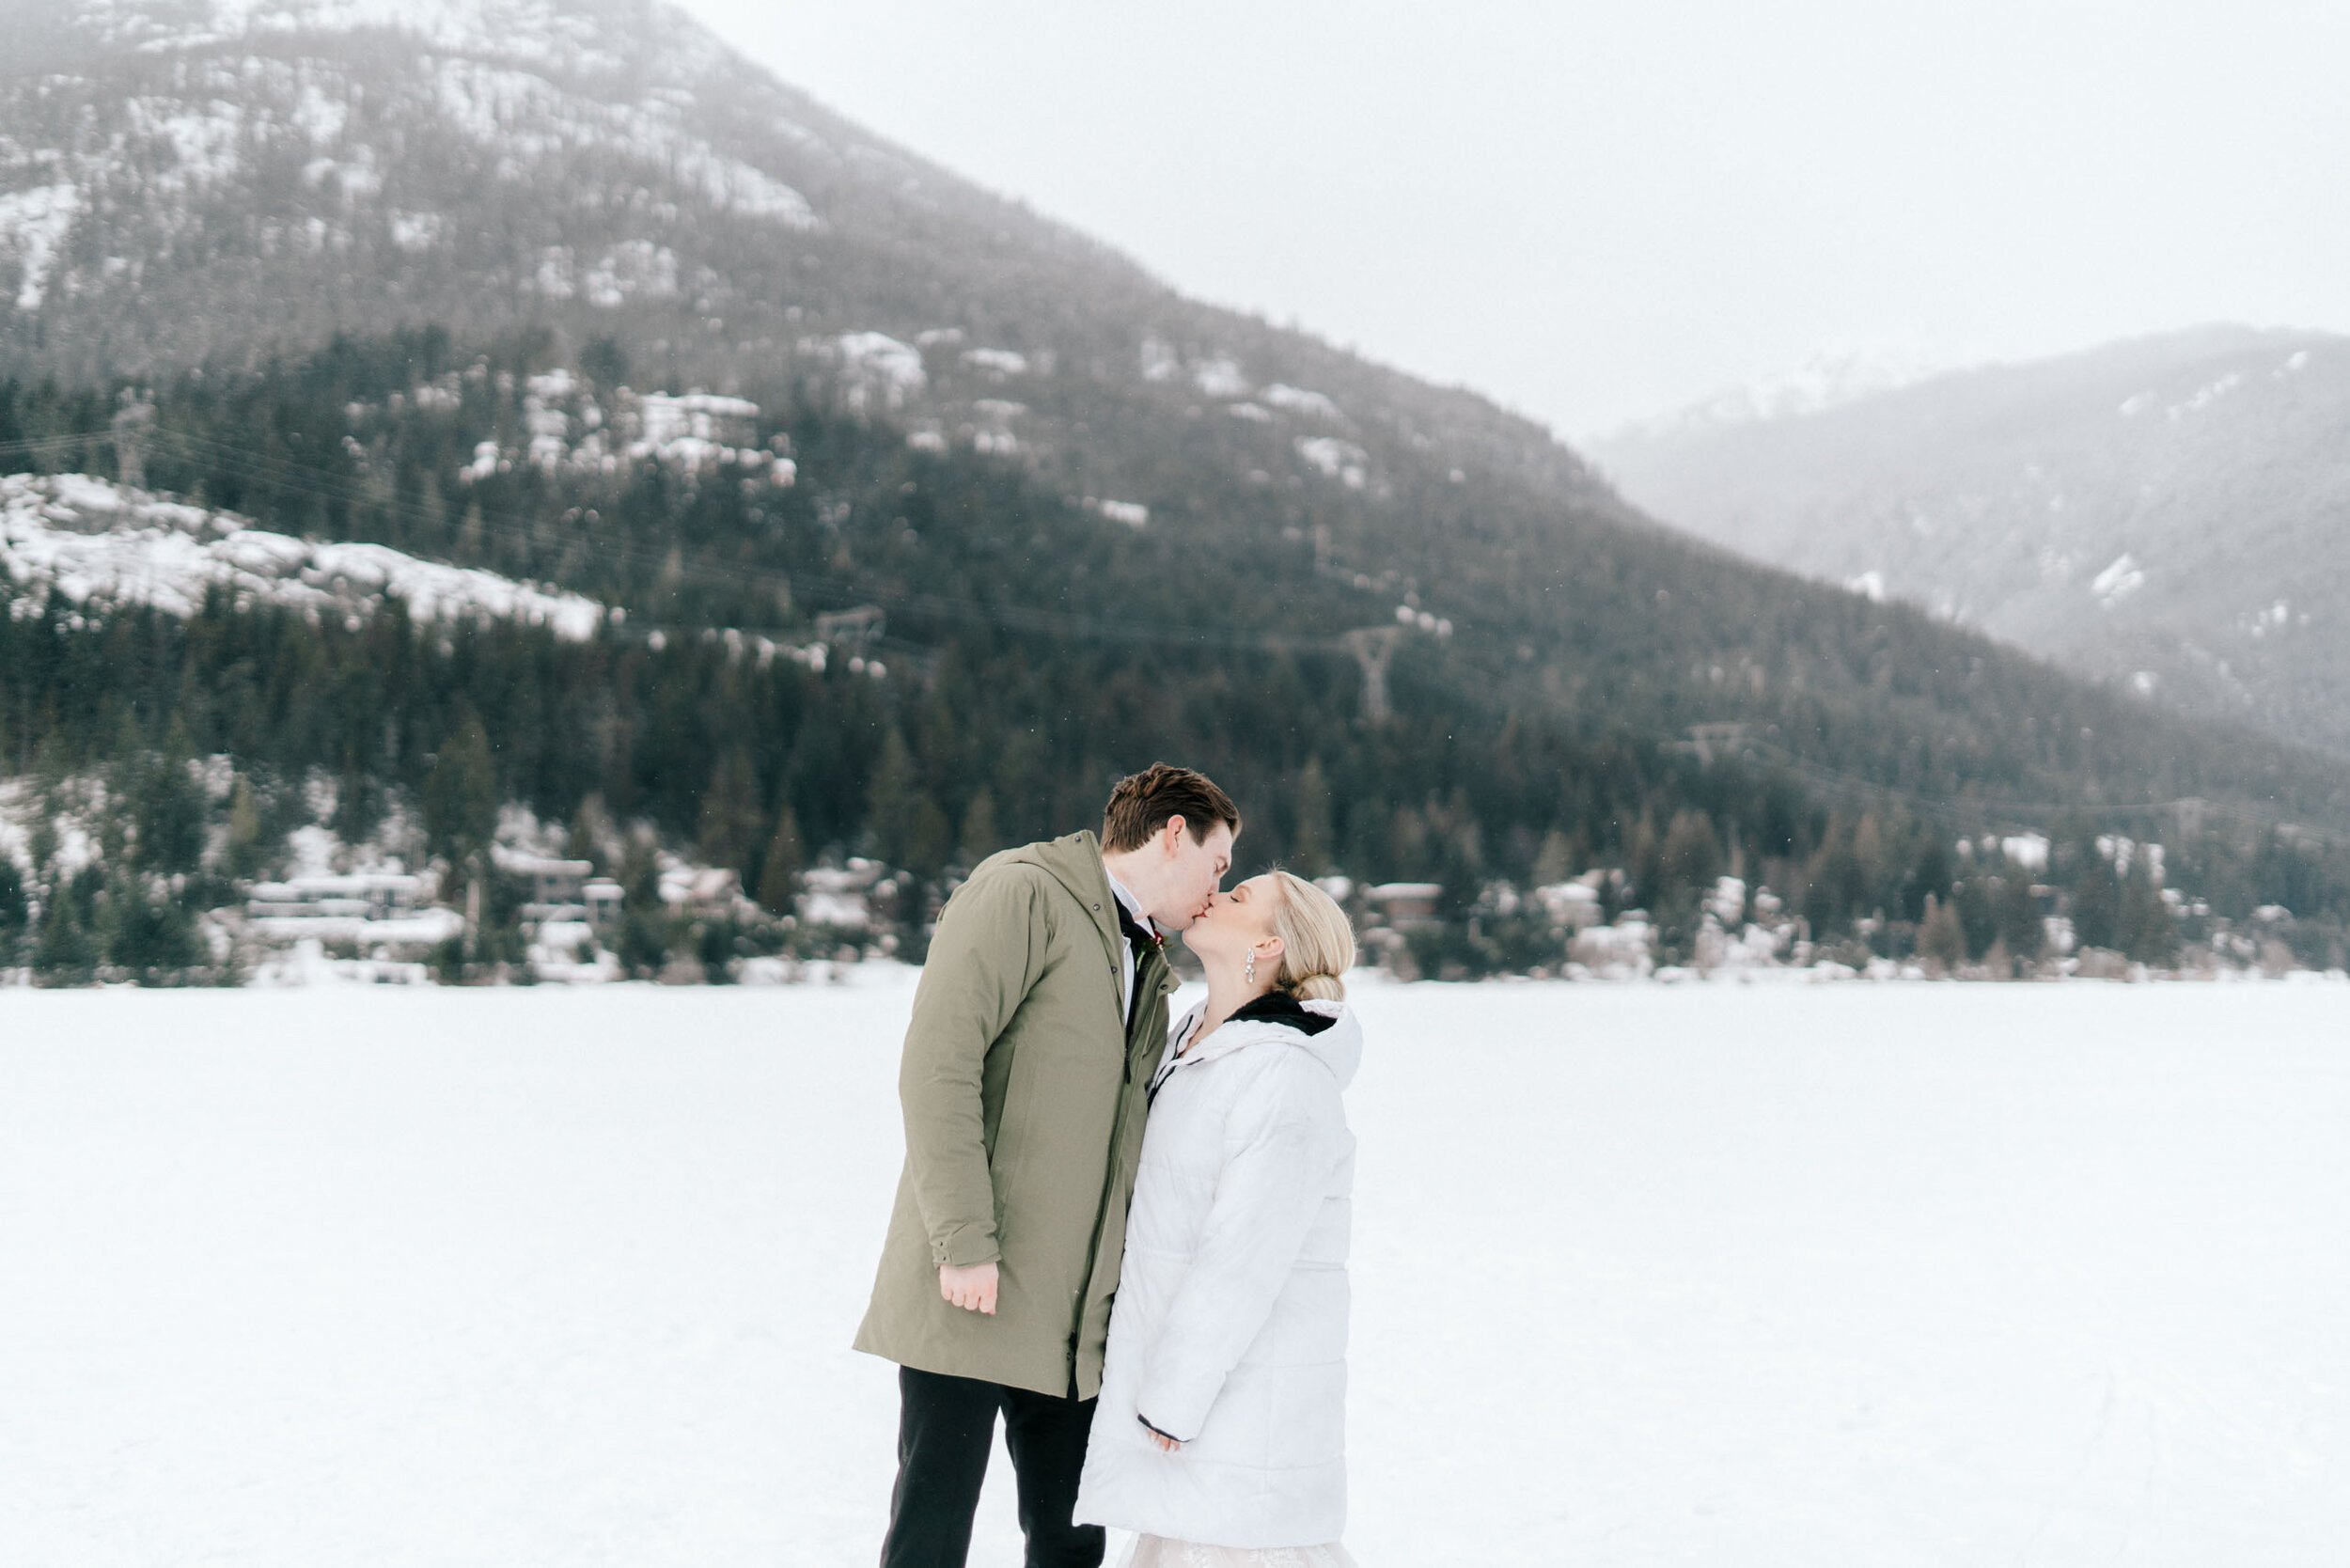 A bride and groom kiss while wearing winter jackets in Whistler, BC.